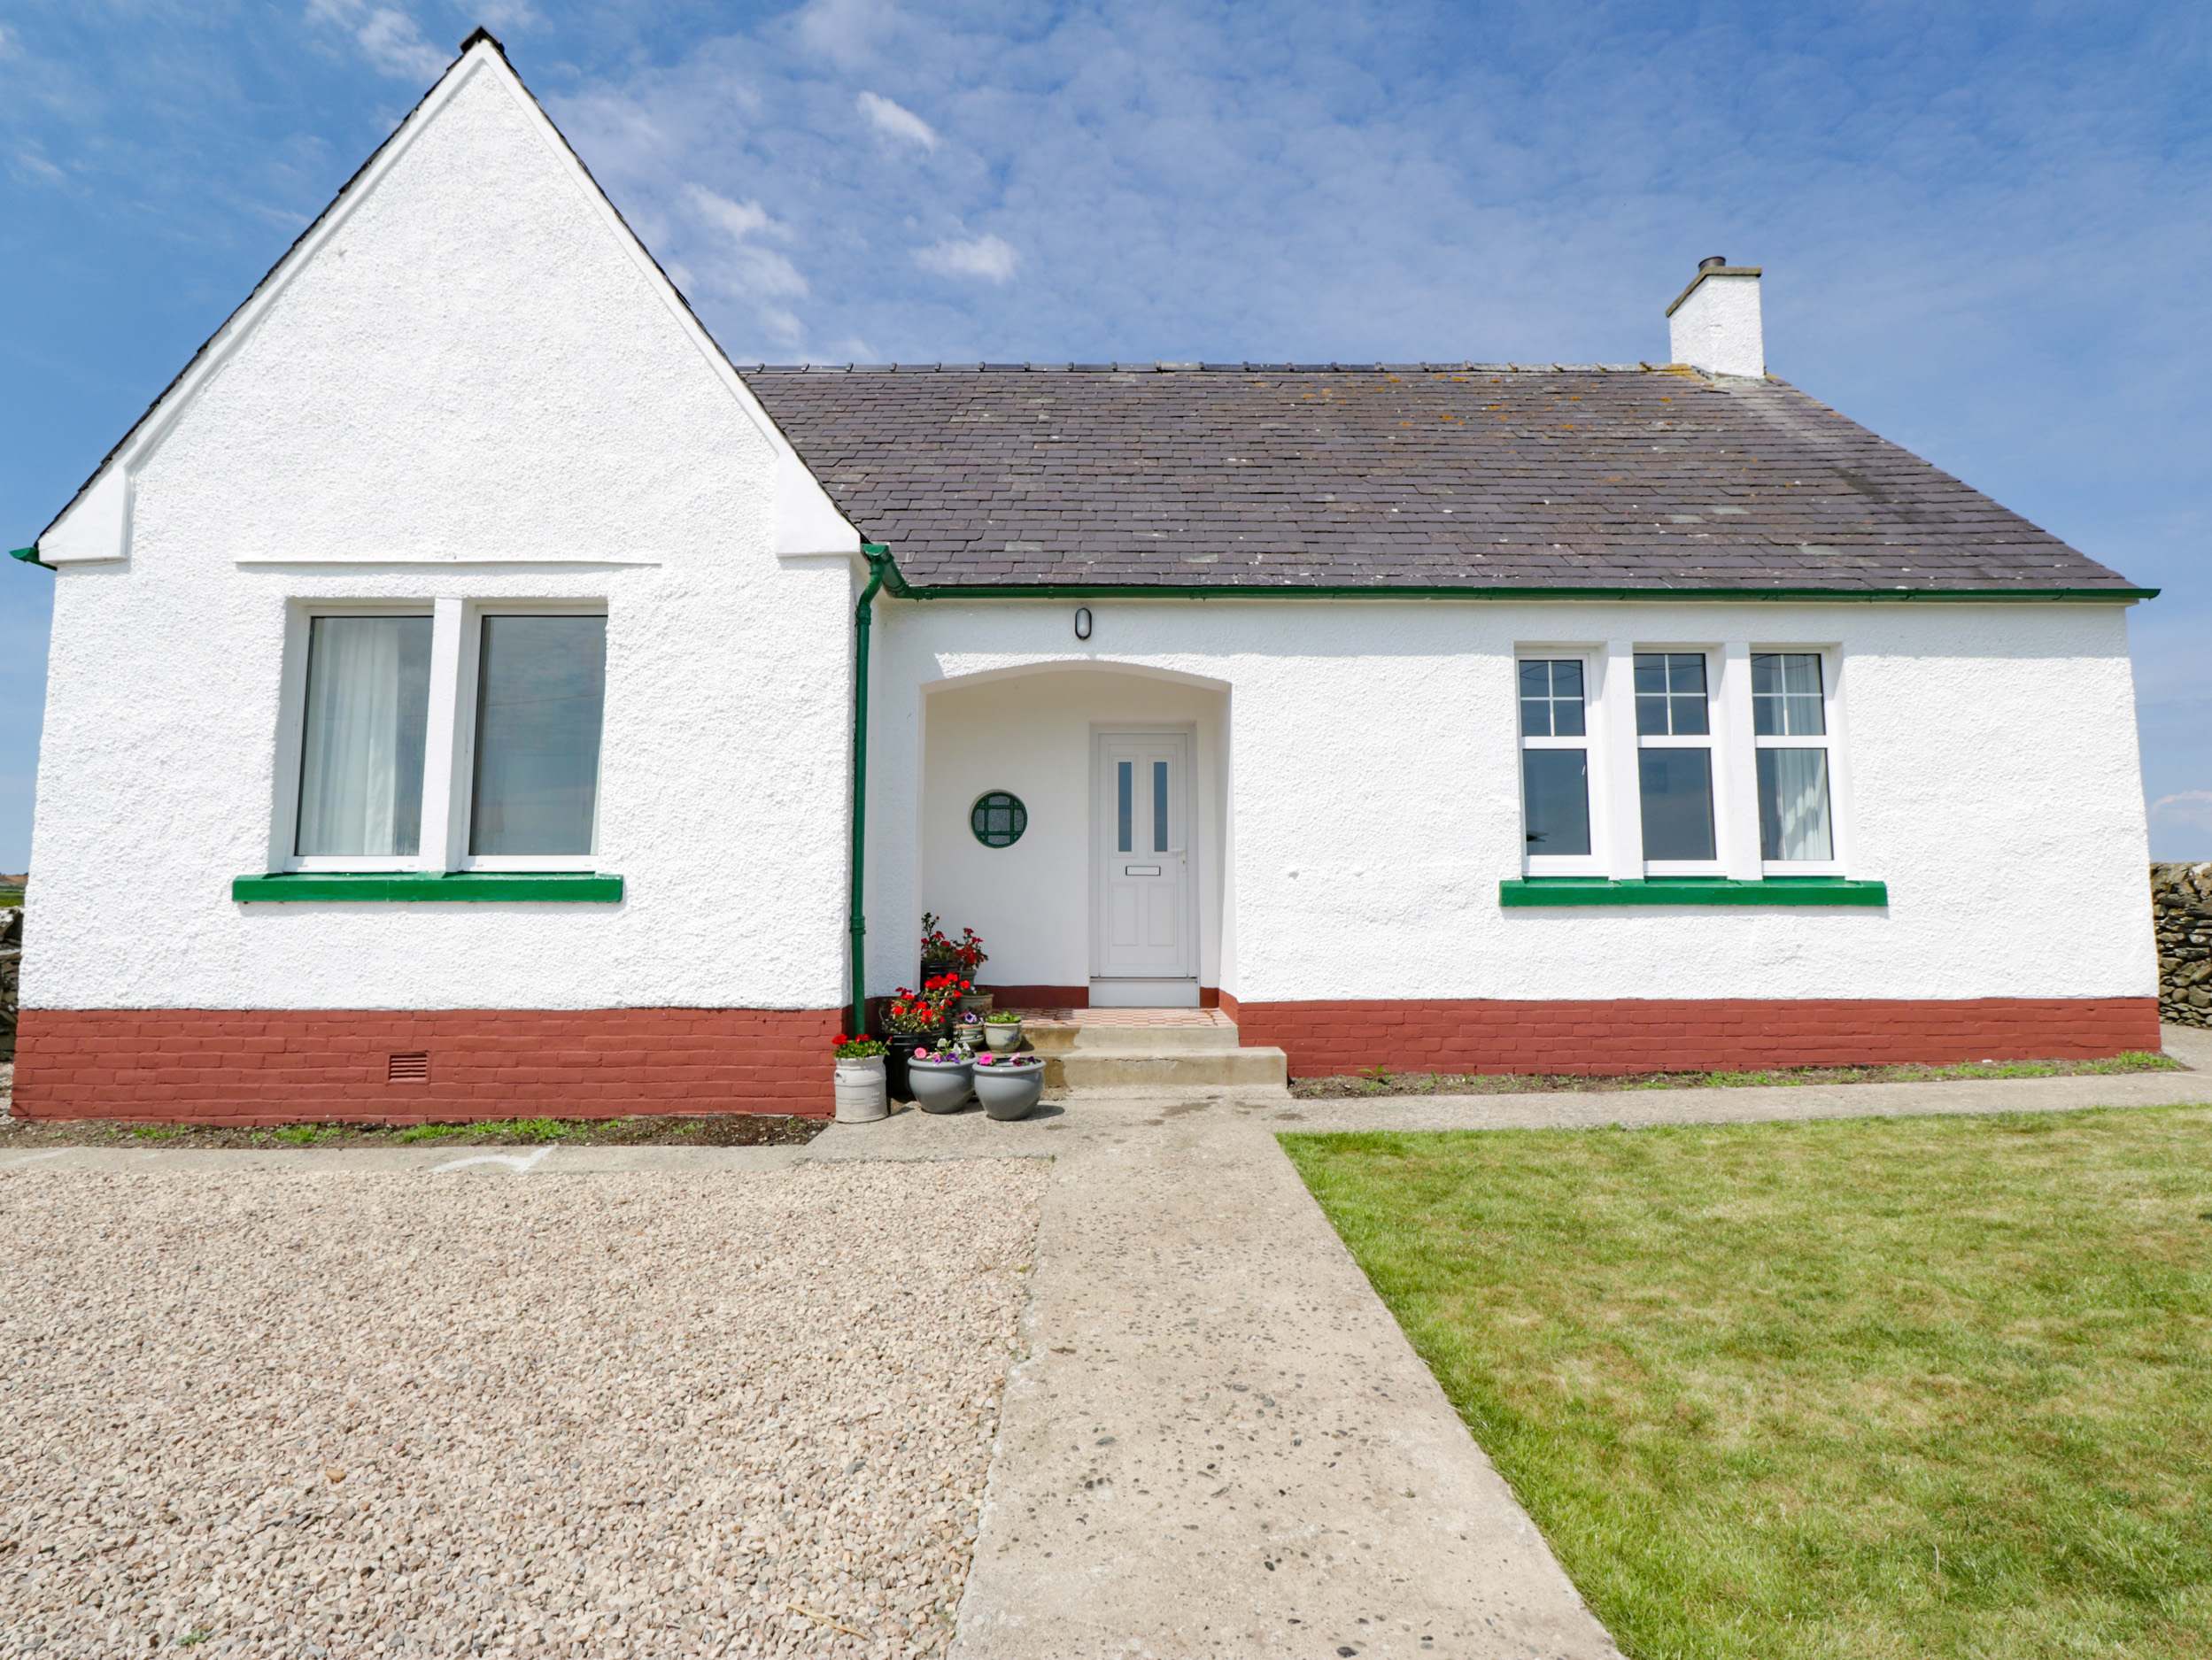 2 bedroom Cottage for rent in Whithorn